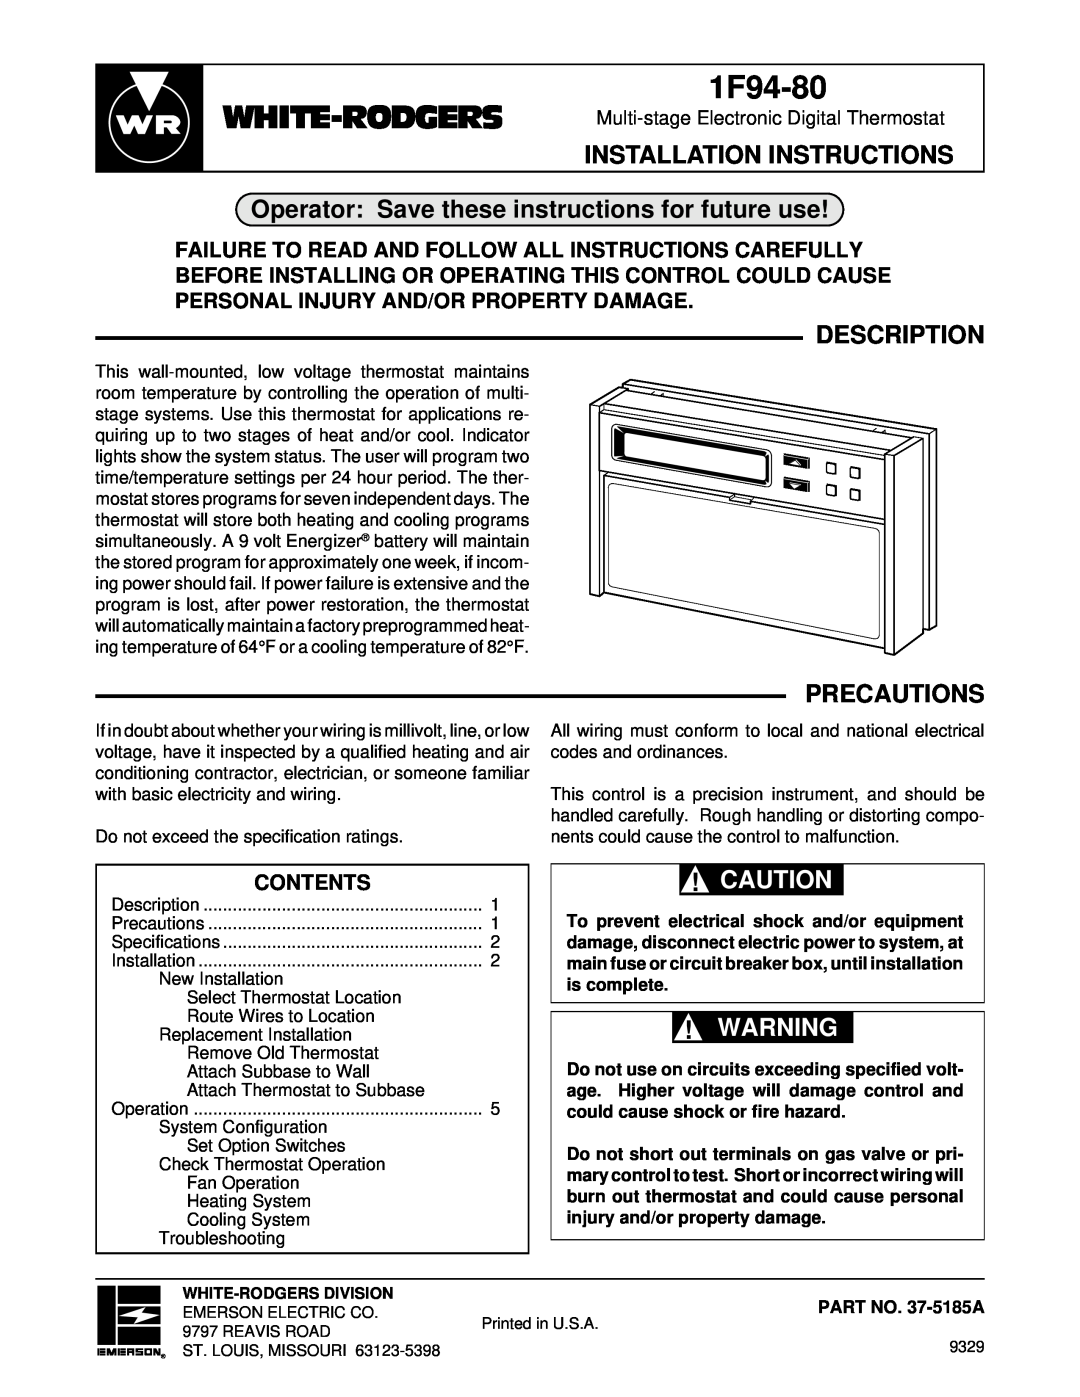 White Rodgers 1F94-80 installation instructions Operator Save these instructions for future use, Description, Precautions 